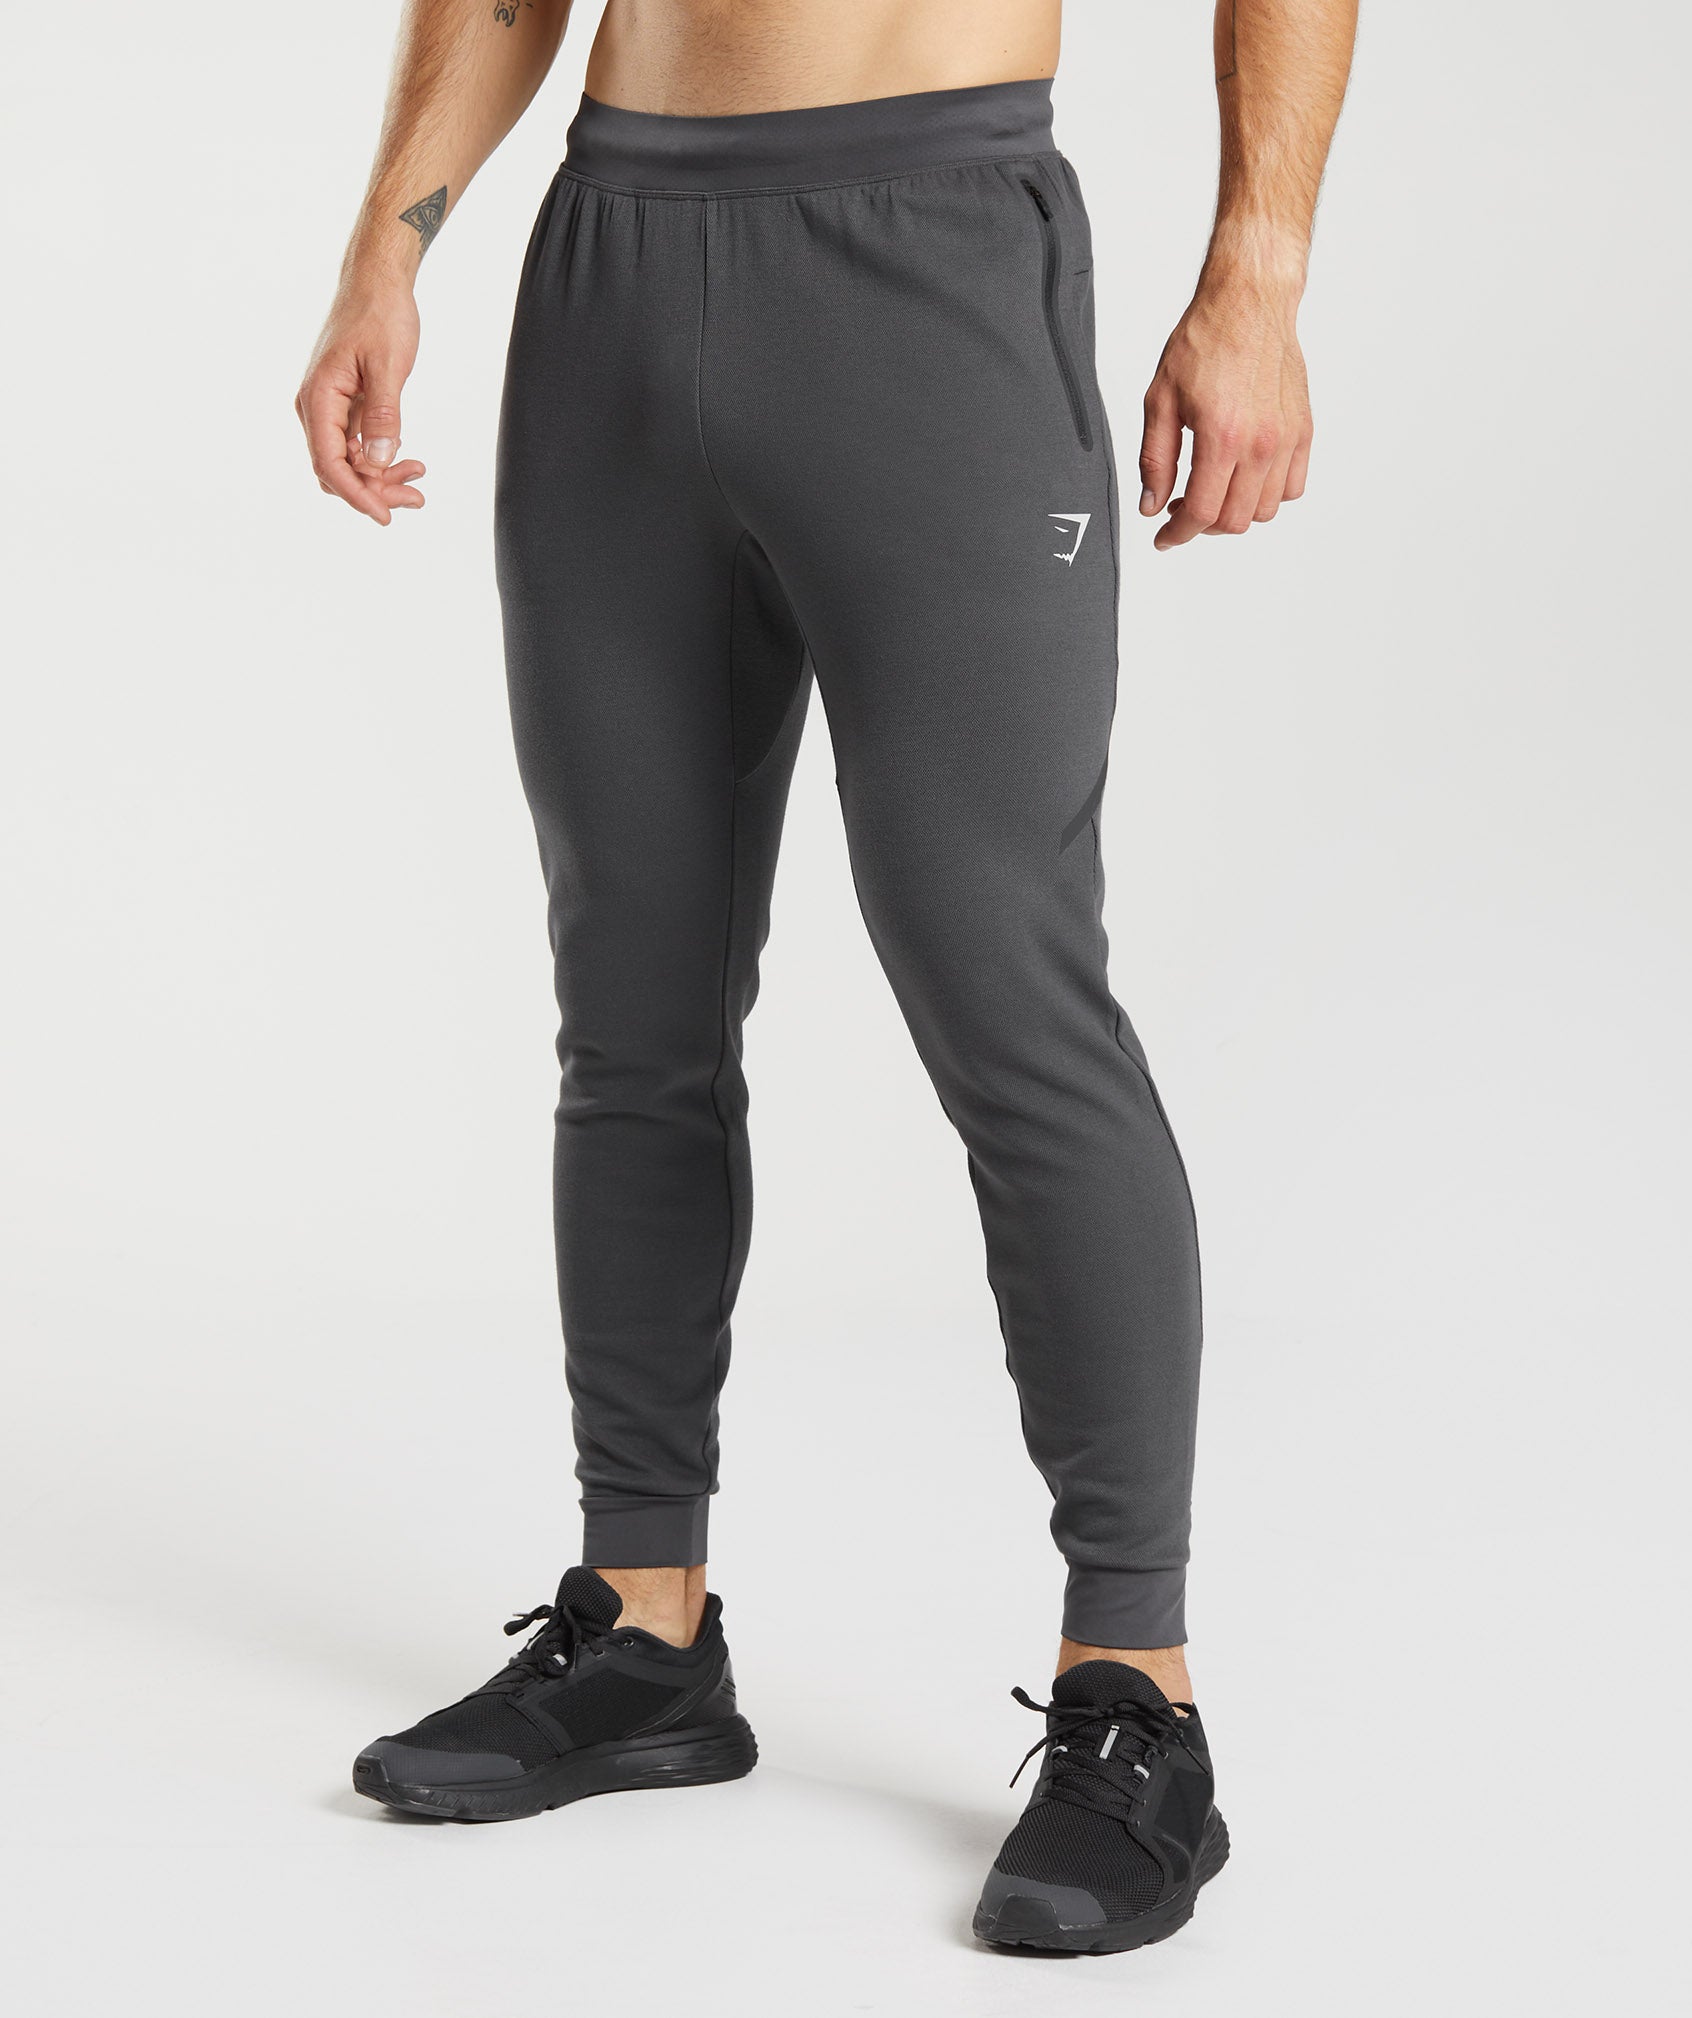 Apex Technical Joggers in Onyx Grey - view 1